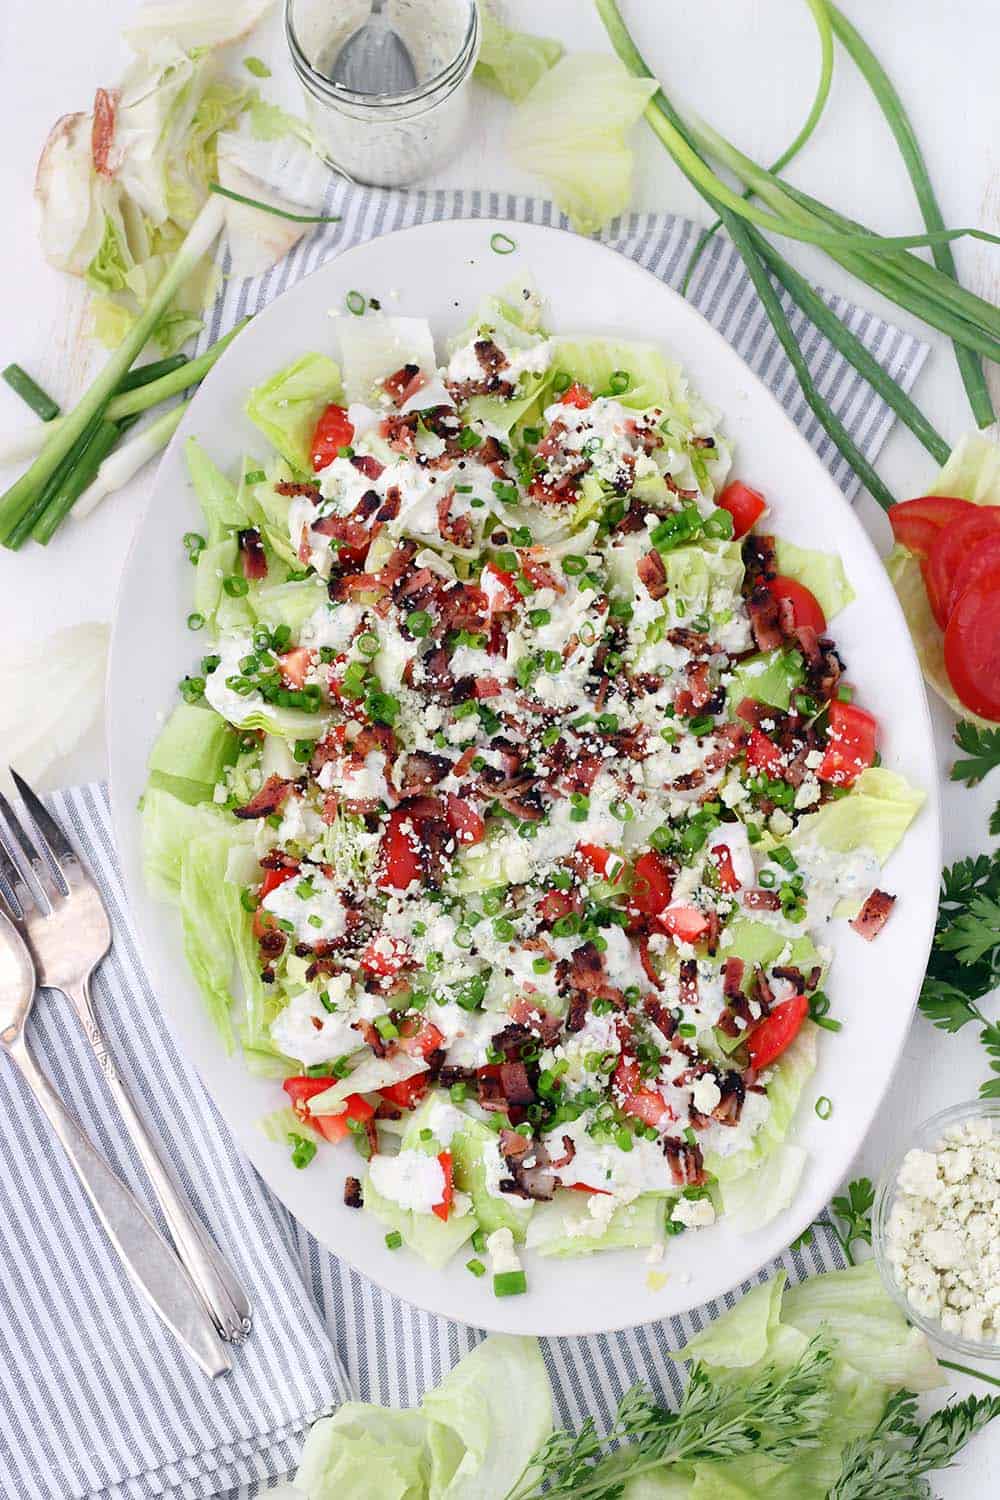 This Deconstructed Wedge Salad recipe has all the classic, refreshing flavor without the need for a knife! Chopped iceberg lettuce is drizzled with homemade blue cheese dressing and topped with crunchy bacon, green onions, and fresh tomatoes.